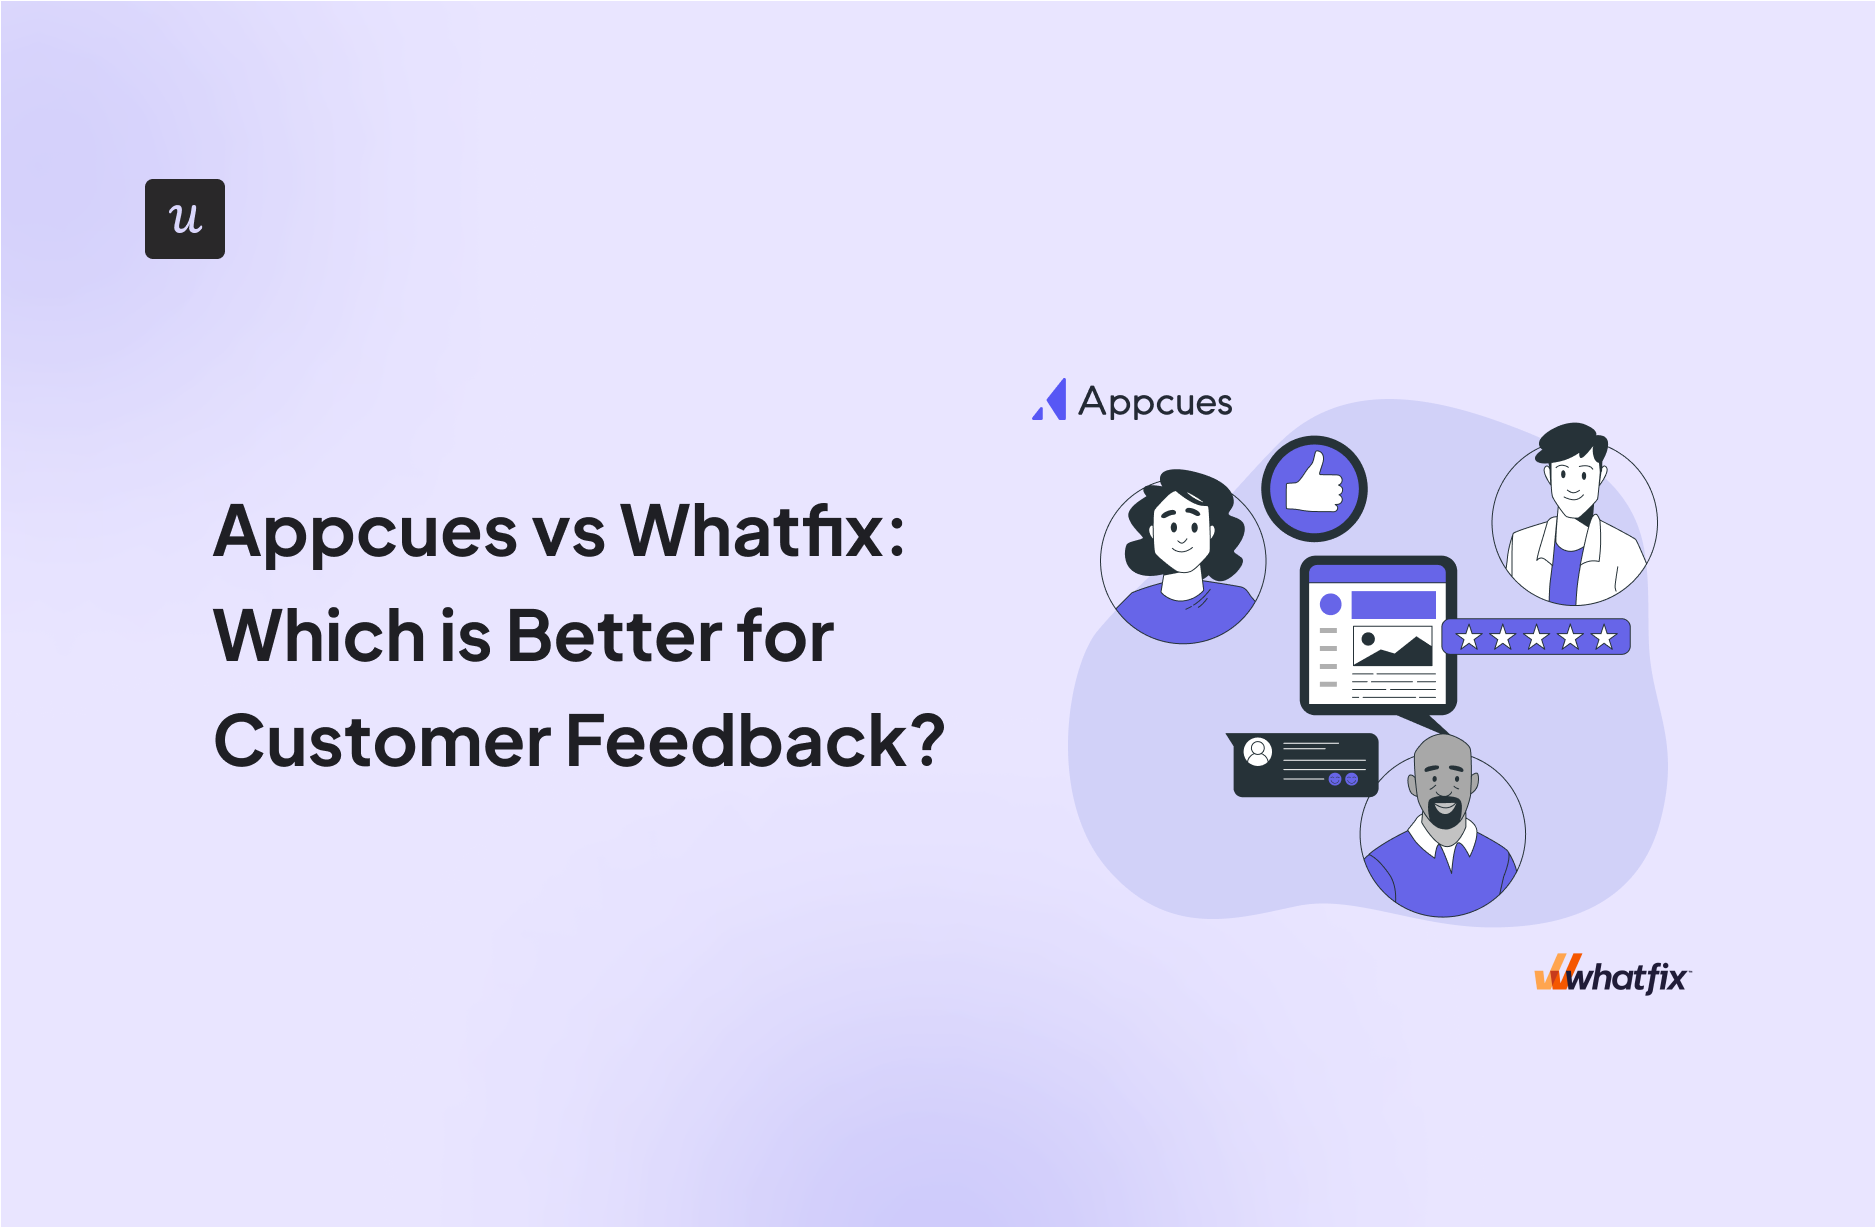 Appcues vs Whatfix: Which is Better for Customer Feedback?